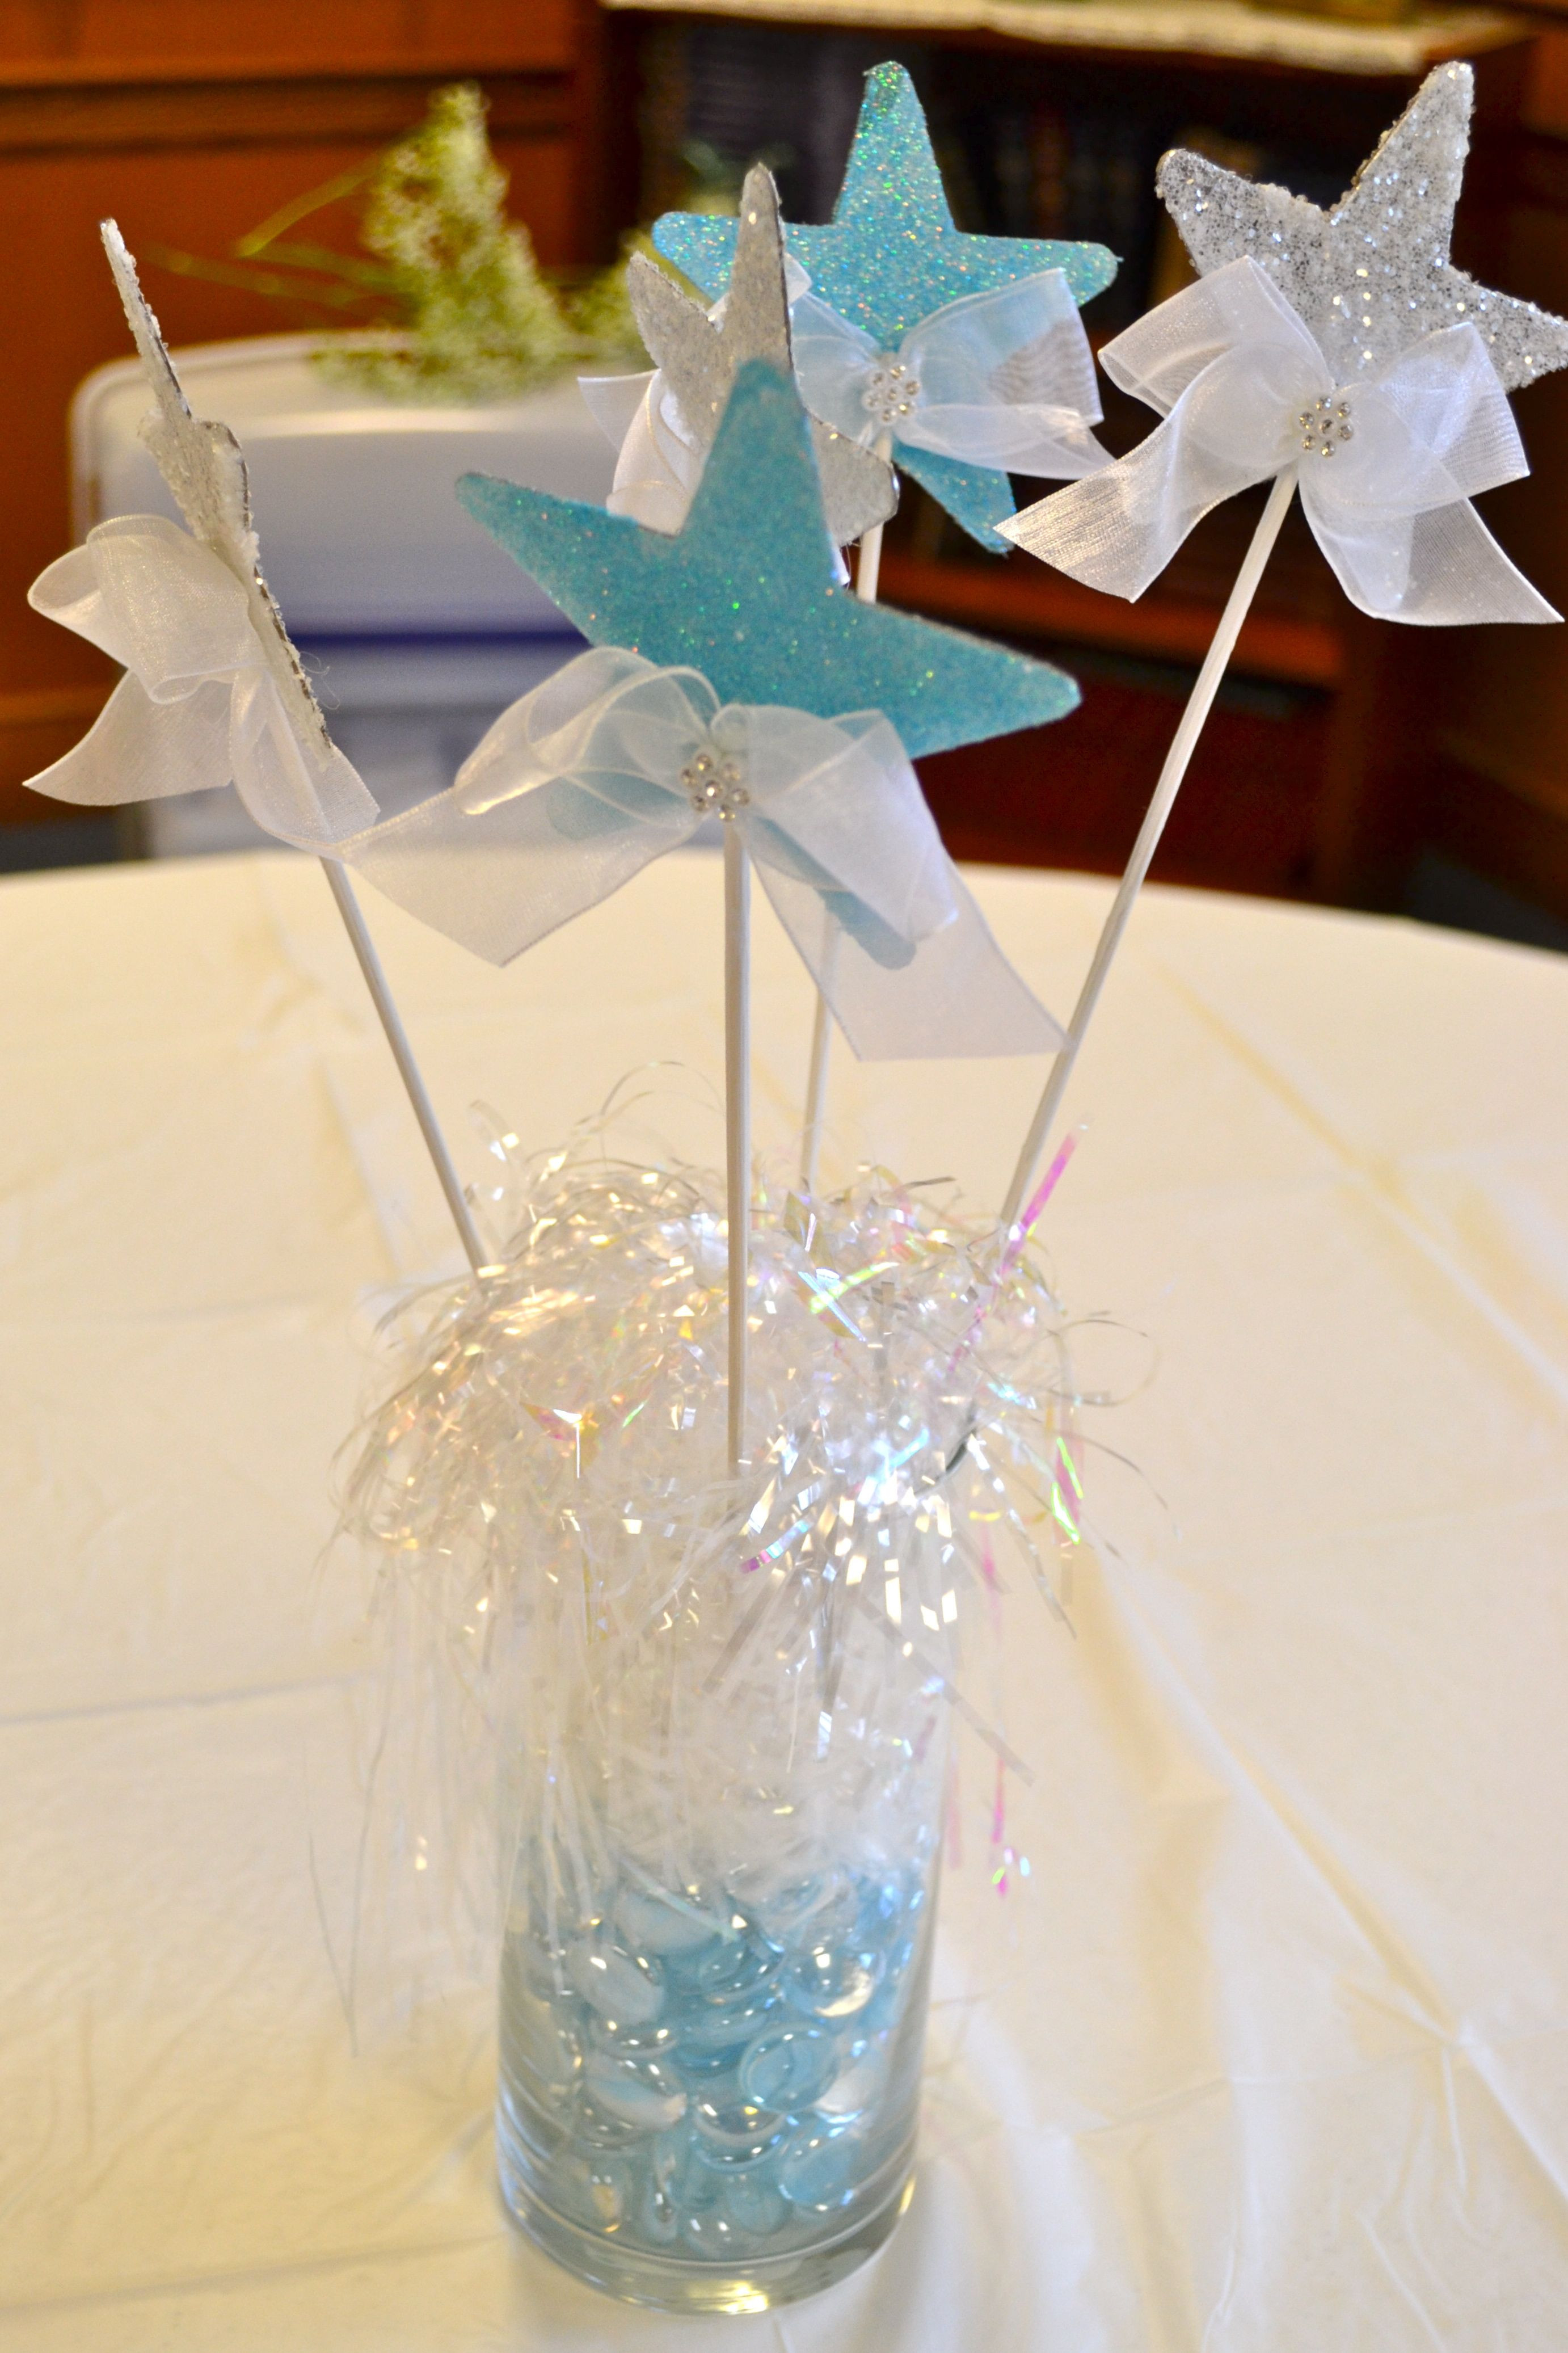 12 Amazing Small Colored Glass Vases 2024 free download small colored glass vases of little star centerpieces empty glass vase filled with silver for little star centerpieces empty glass vase filled with silver white and blue shiny stuff attach s